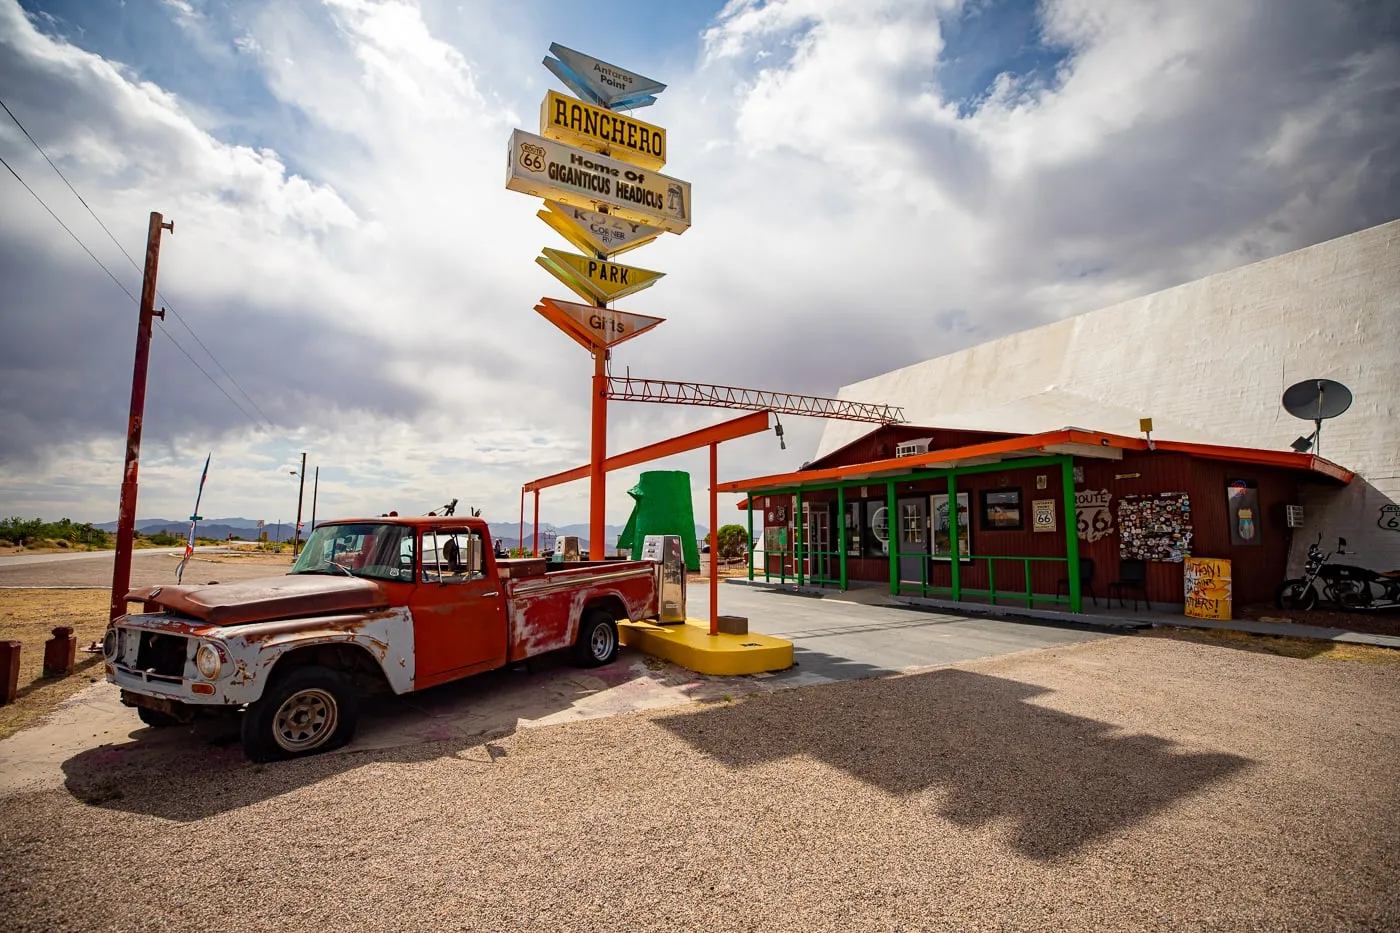 Antares Point Visitor Center & Gift Shop on Route 66 in Kingman, Arizona